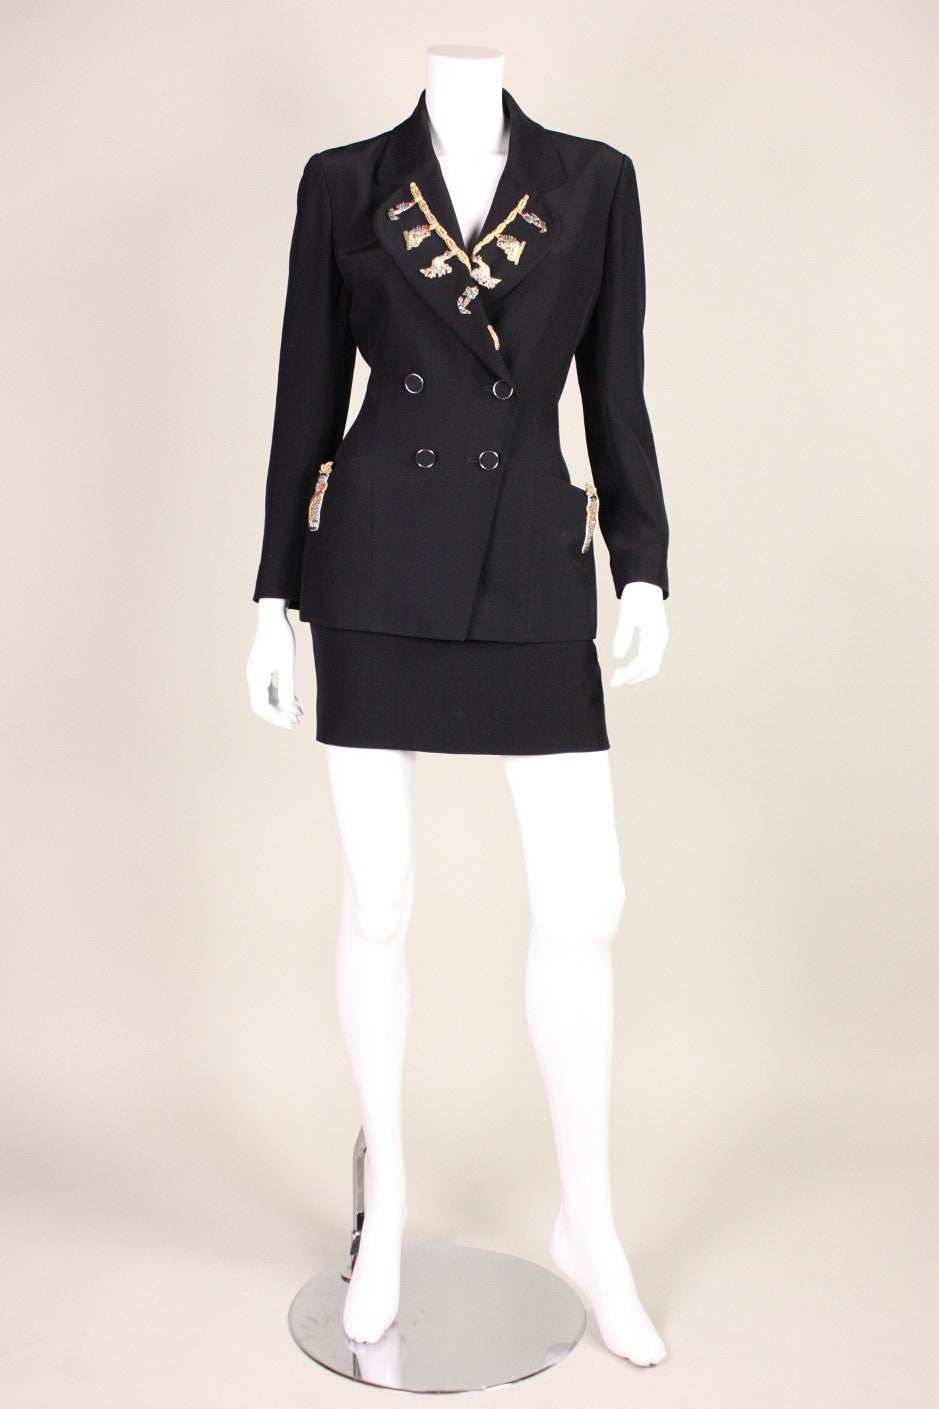 1990's Karl Lagerfeld Embellished Suit

Both pieces are labeled a size 40.